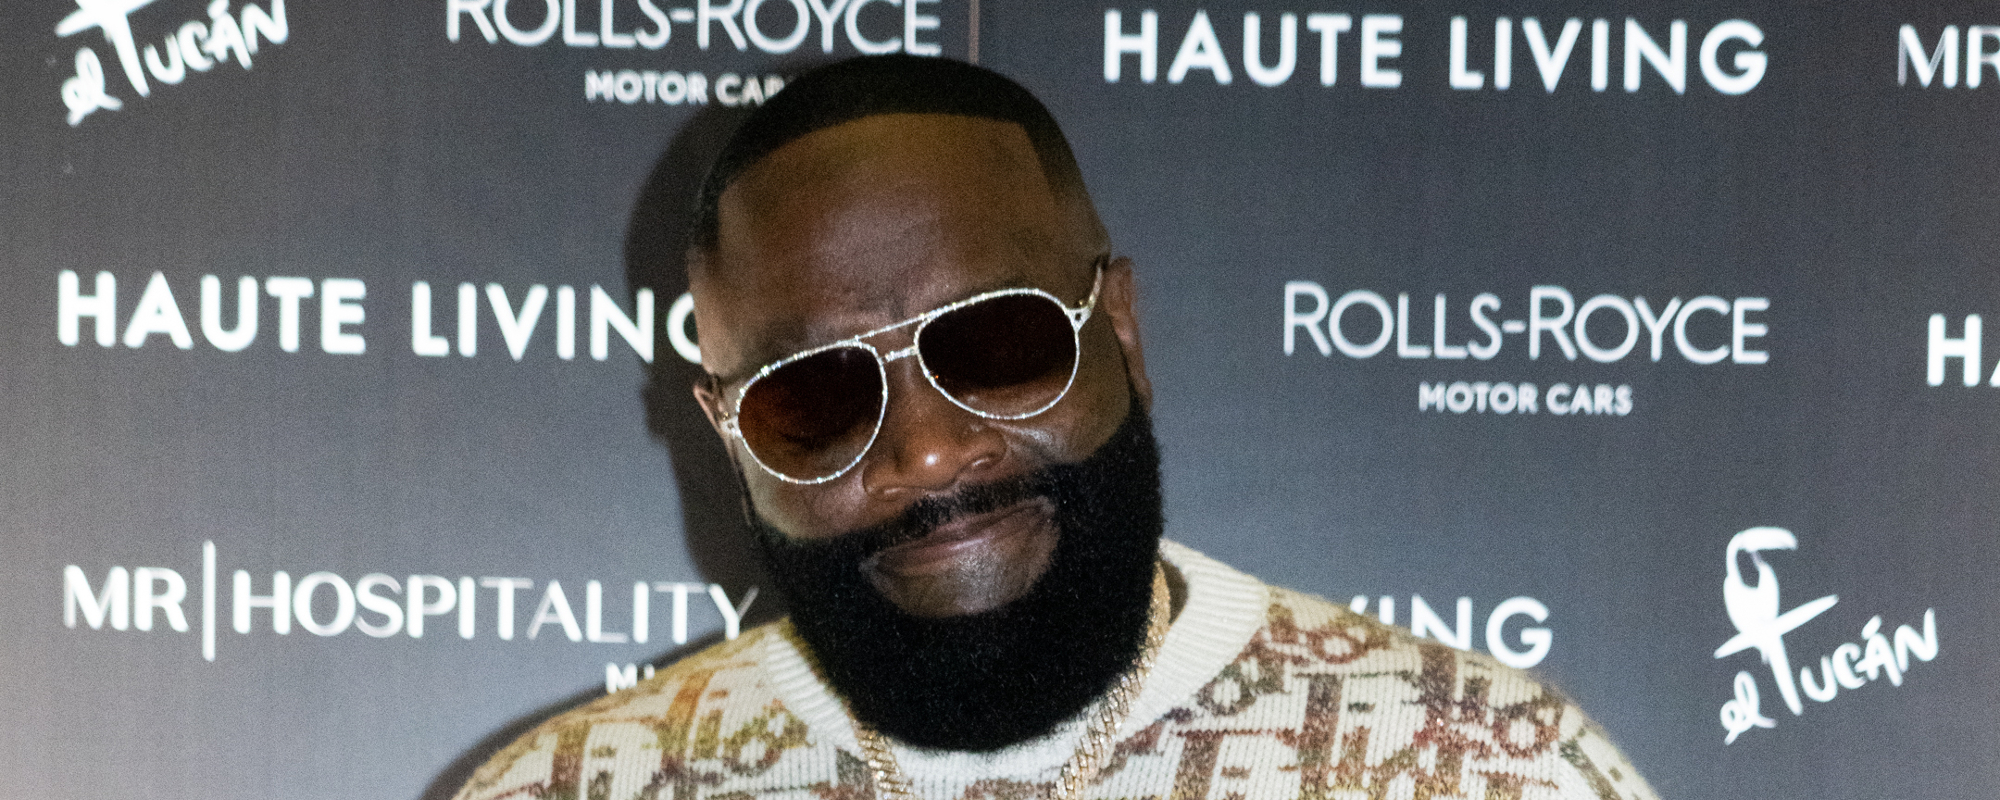 Rick Ross Vows To Climb Mount Kilimanjaro, Shares Training Video in Preparation: “Promise I Won’t Fall Out”